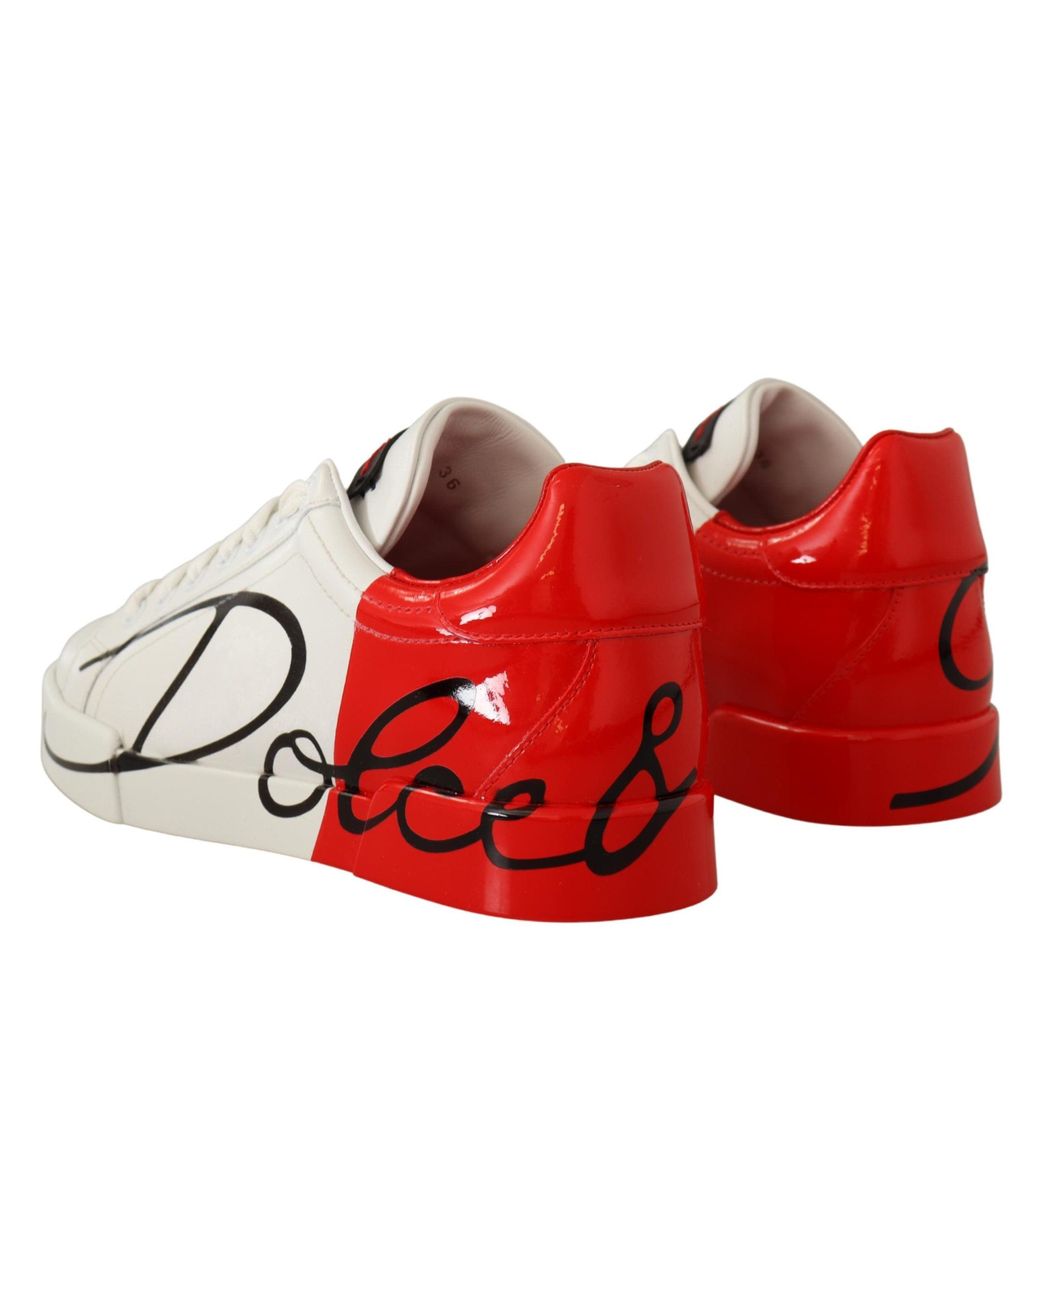 Dolce & Gabbana Red Lace Up Low Top Sneakers Shoes in White | Lyst